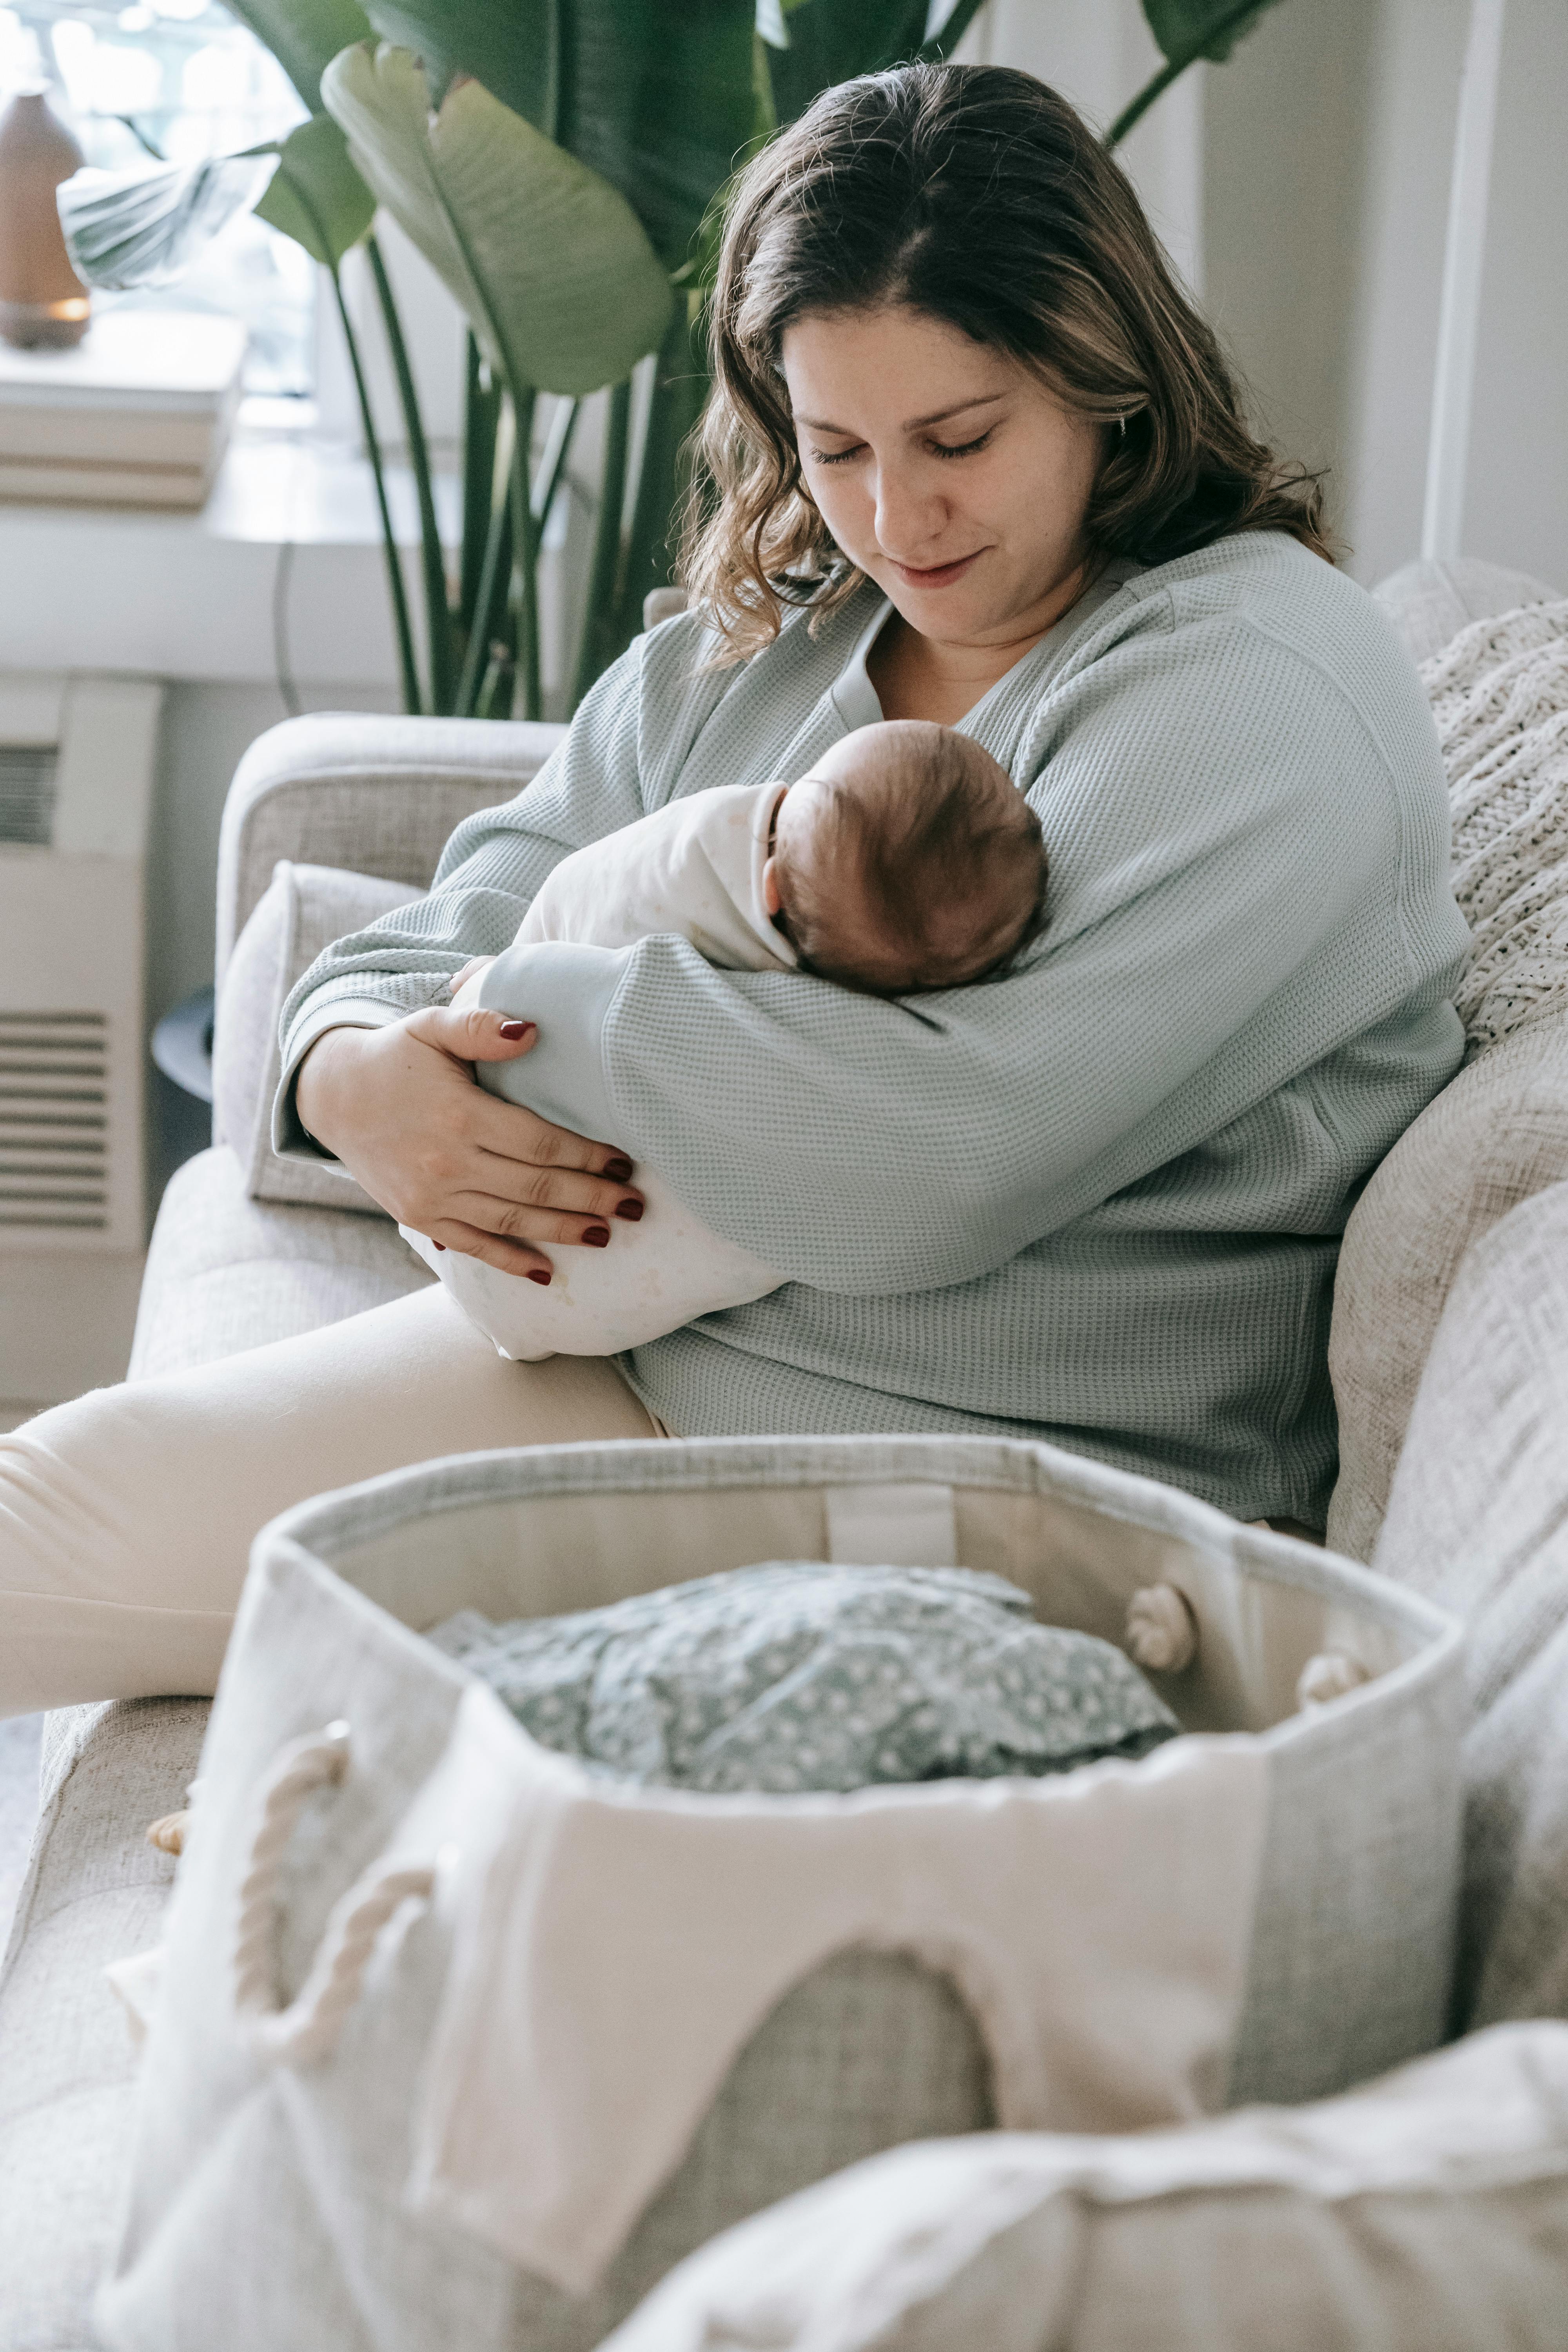 A mother and her newborn. For illustration purposes only | Source: Pexels